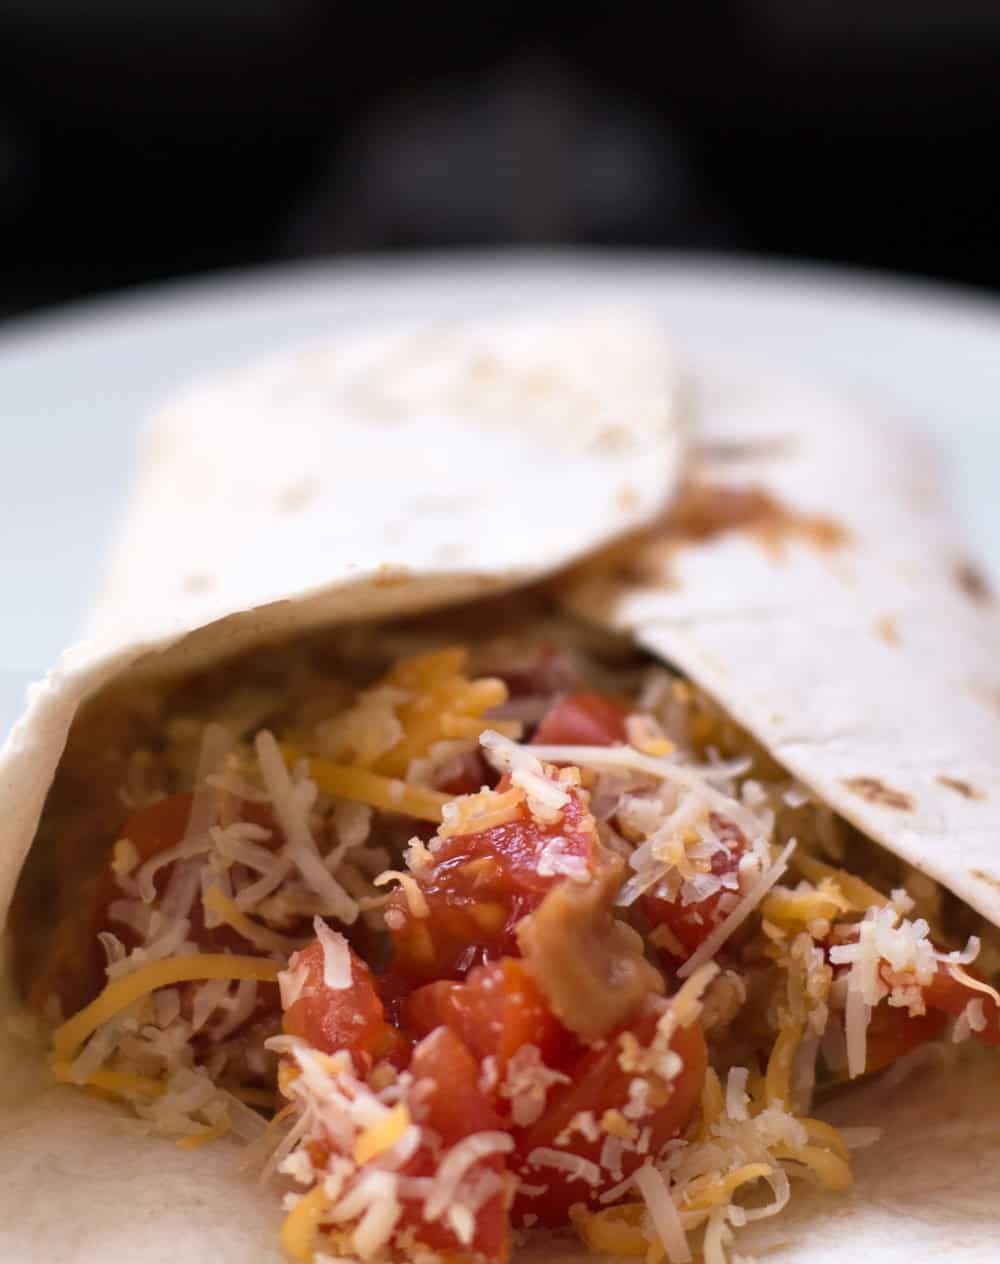 Refried bean burritos are easy to make. They're great for Game Day or any day for that matter.